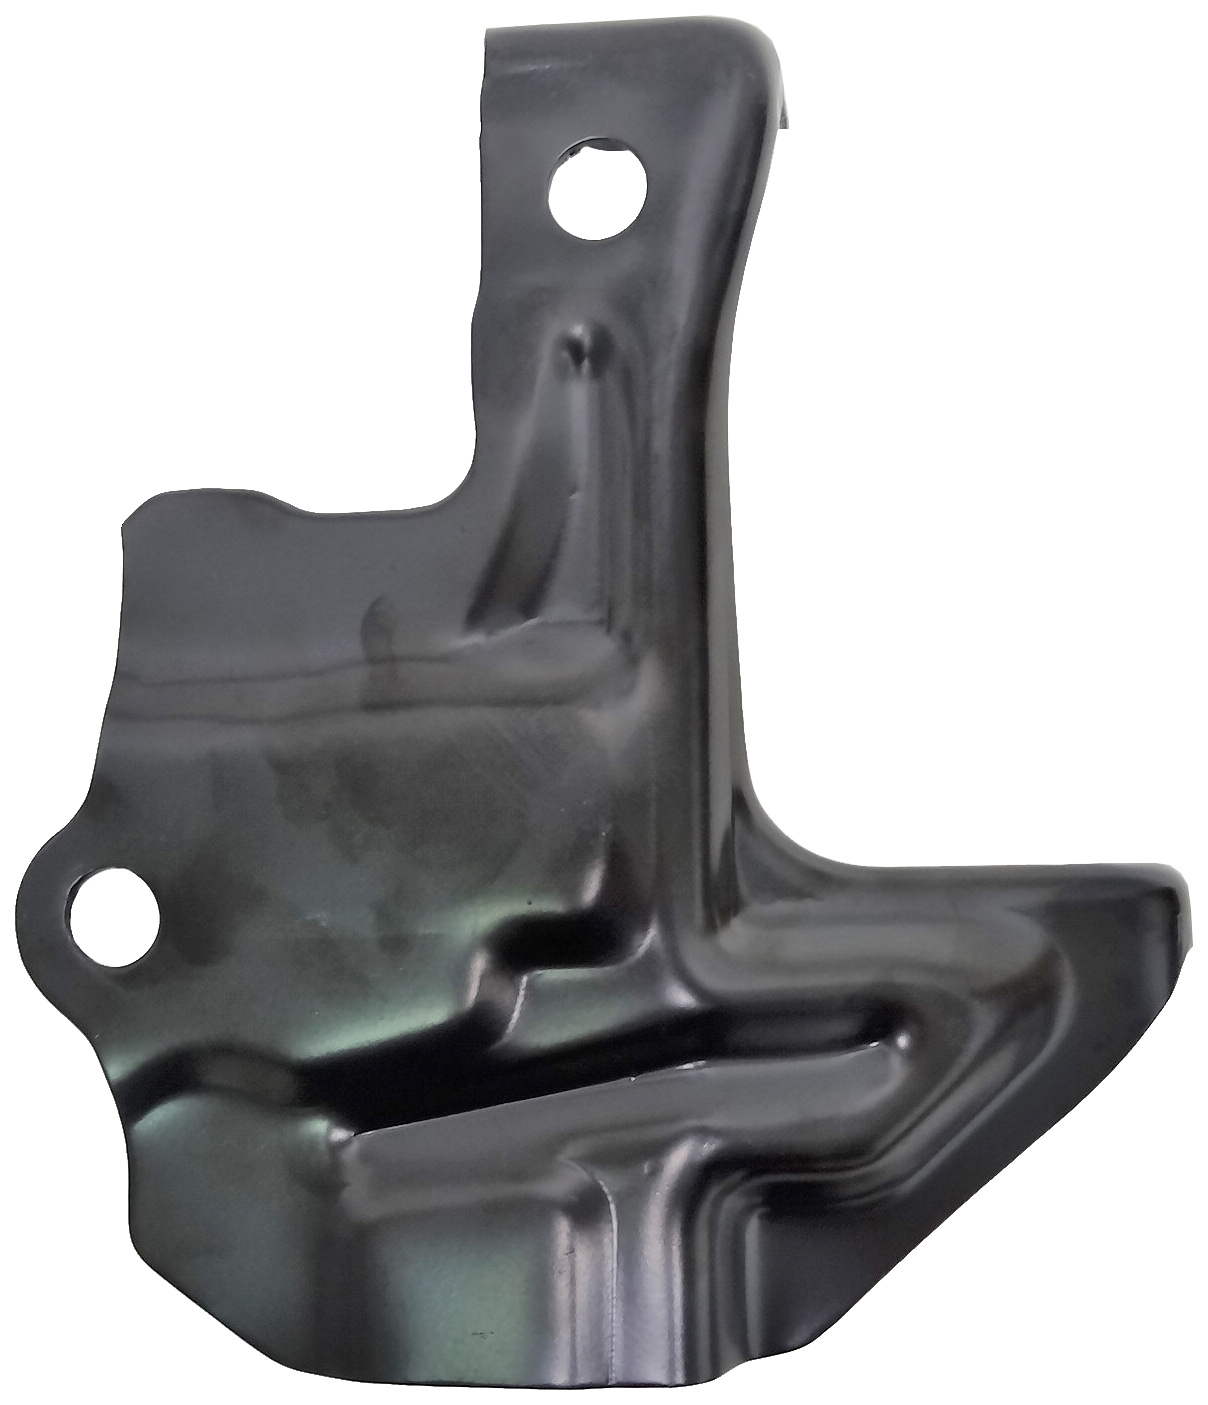 Aftermarket RADIATOR SUPPORTS for TOYOTA - CAMRY, CAMRY,18-22,Radiator support